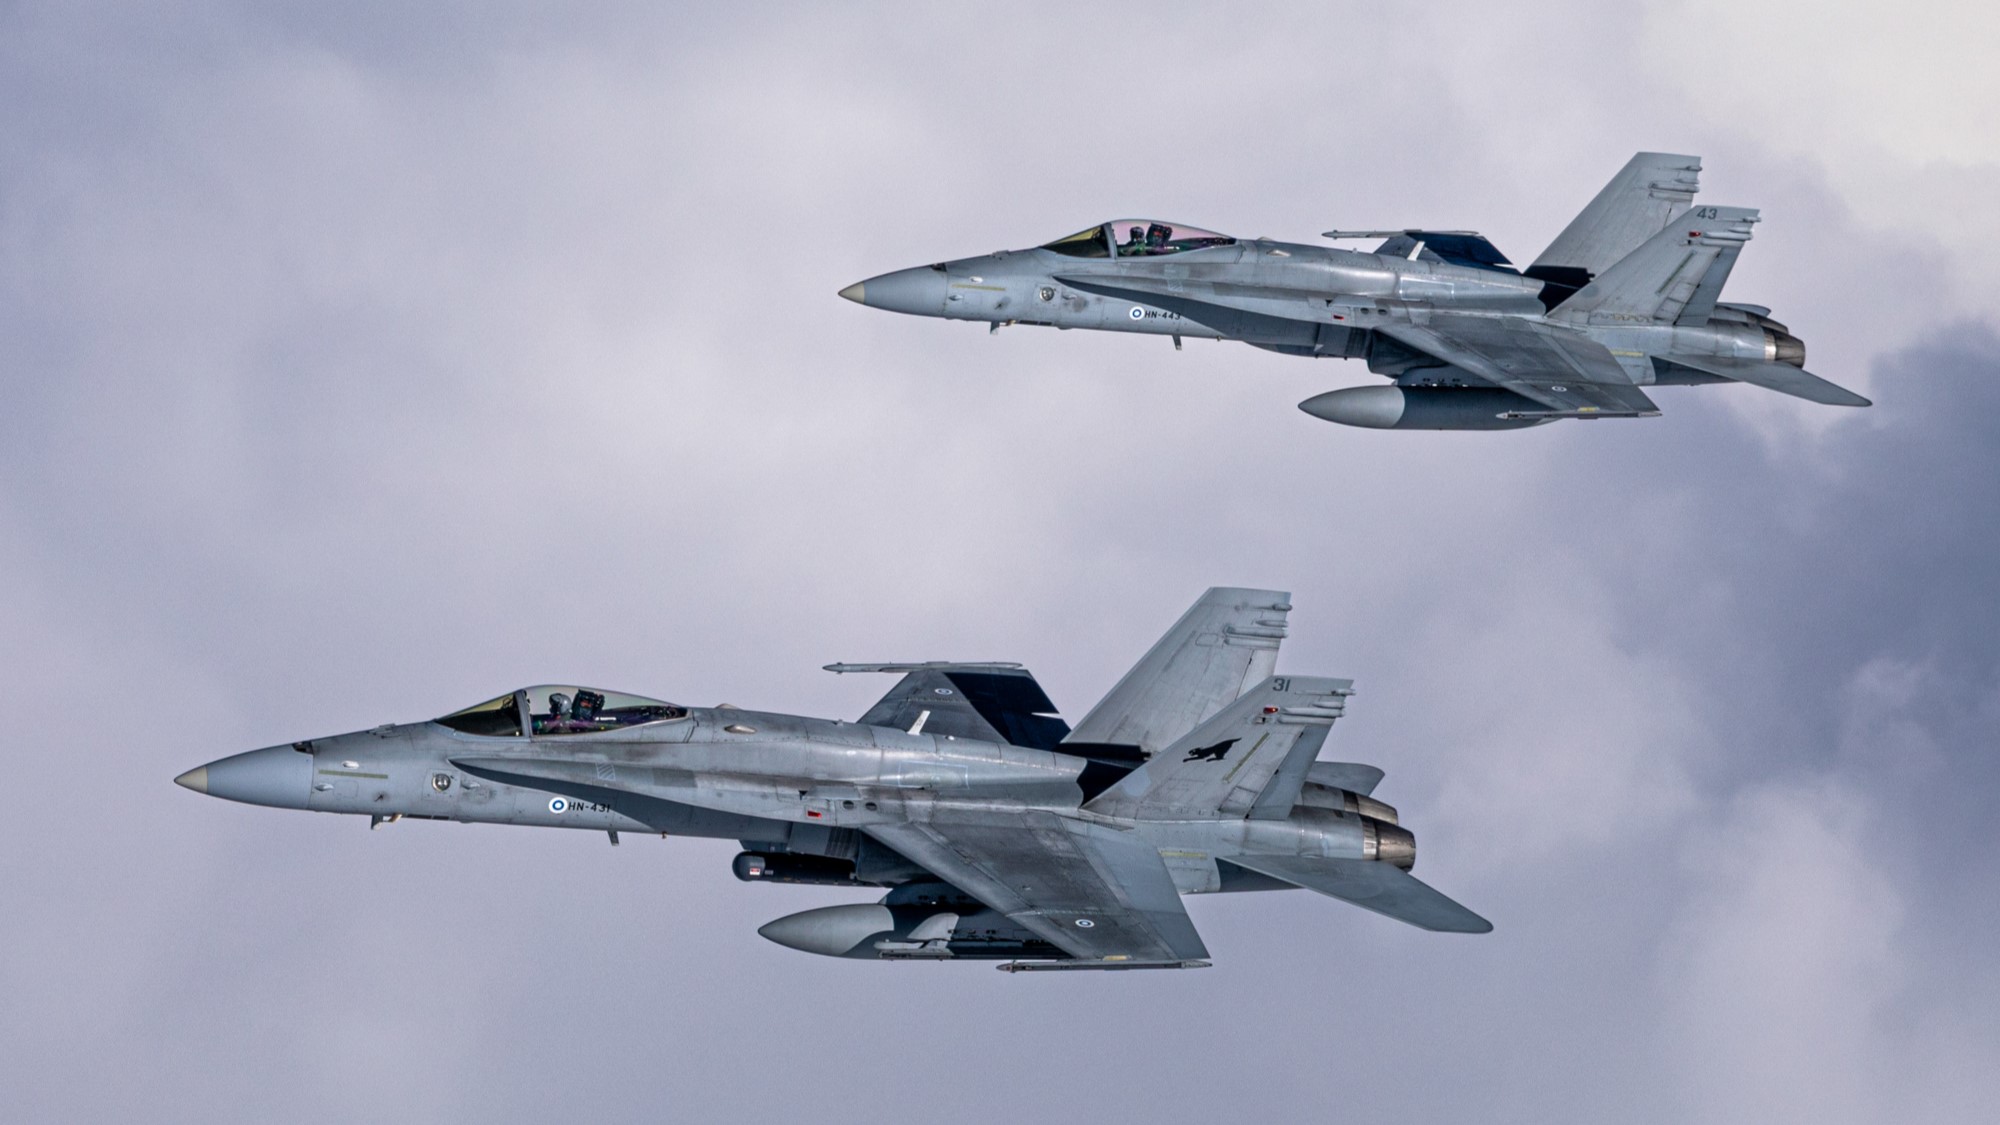 Two F/A-18 Hornet fighter jets